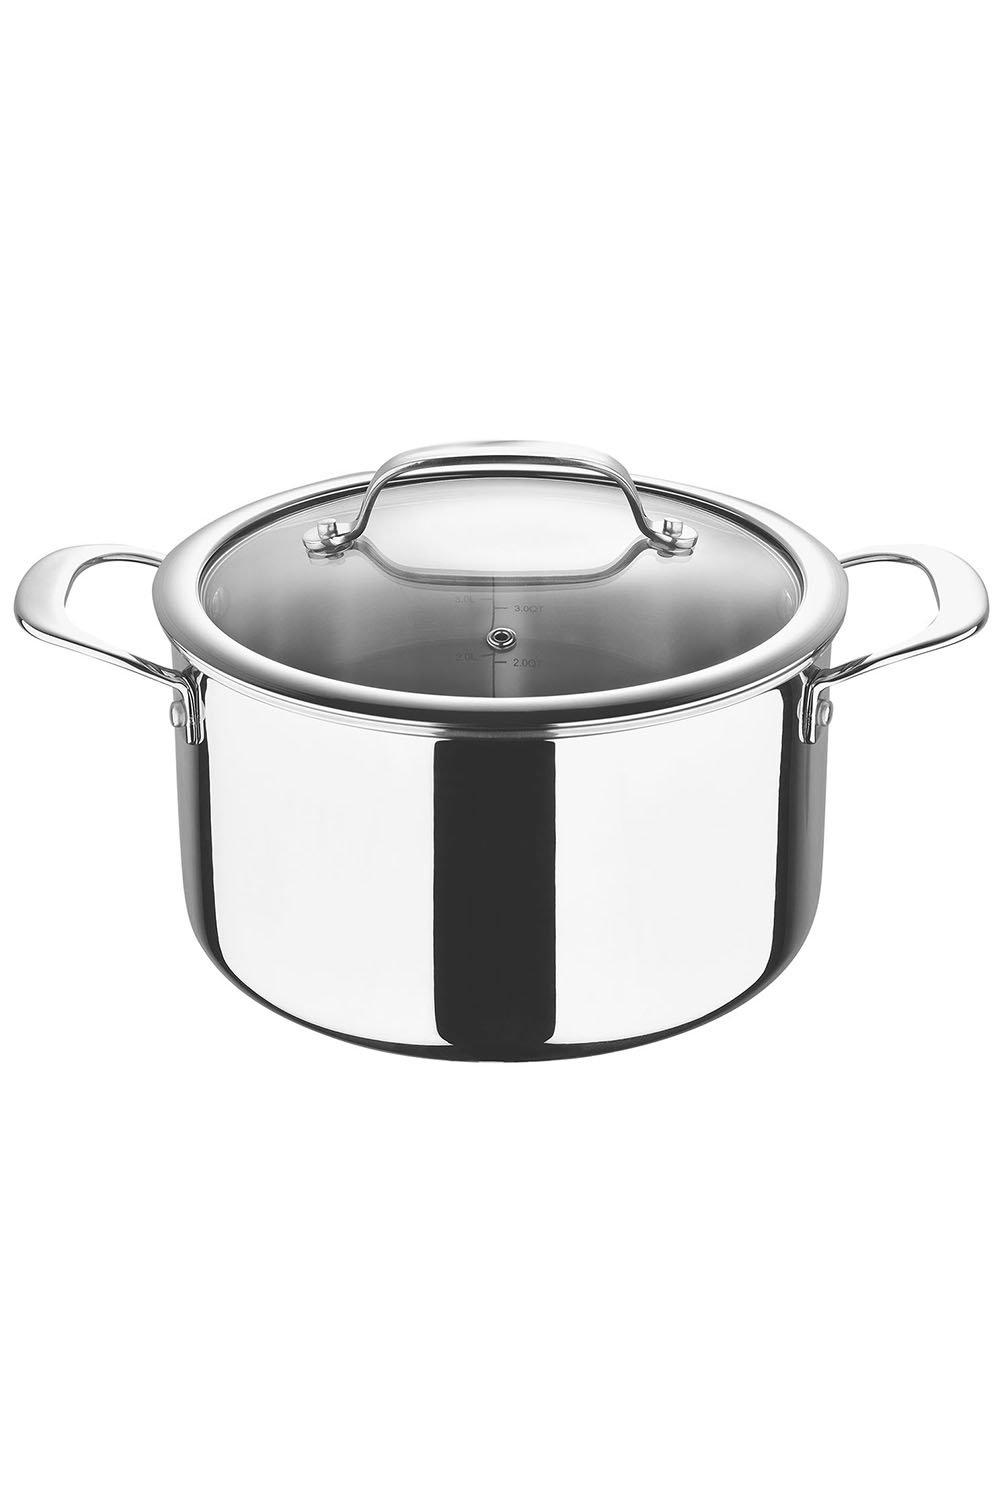 Argent 3 Stainless Steel Non-stick Casserole with Glass Lid 22cm Silver